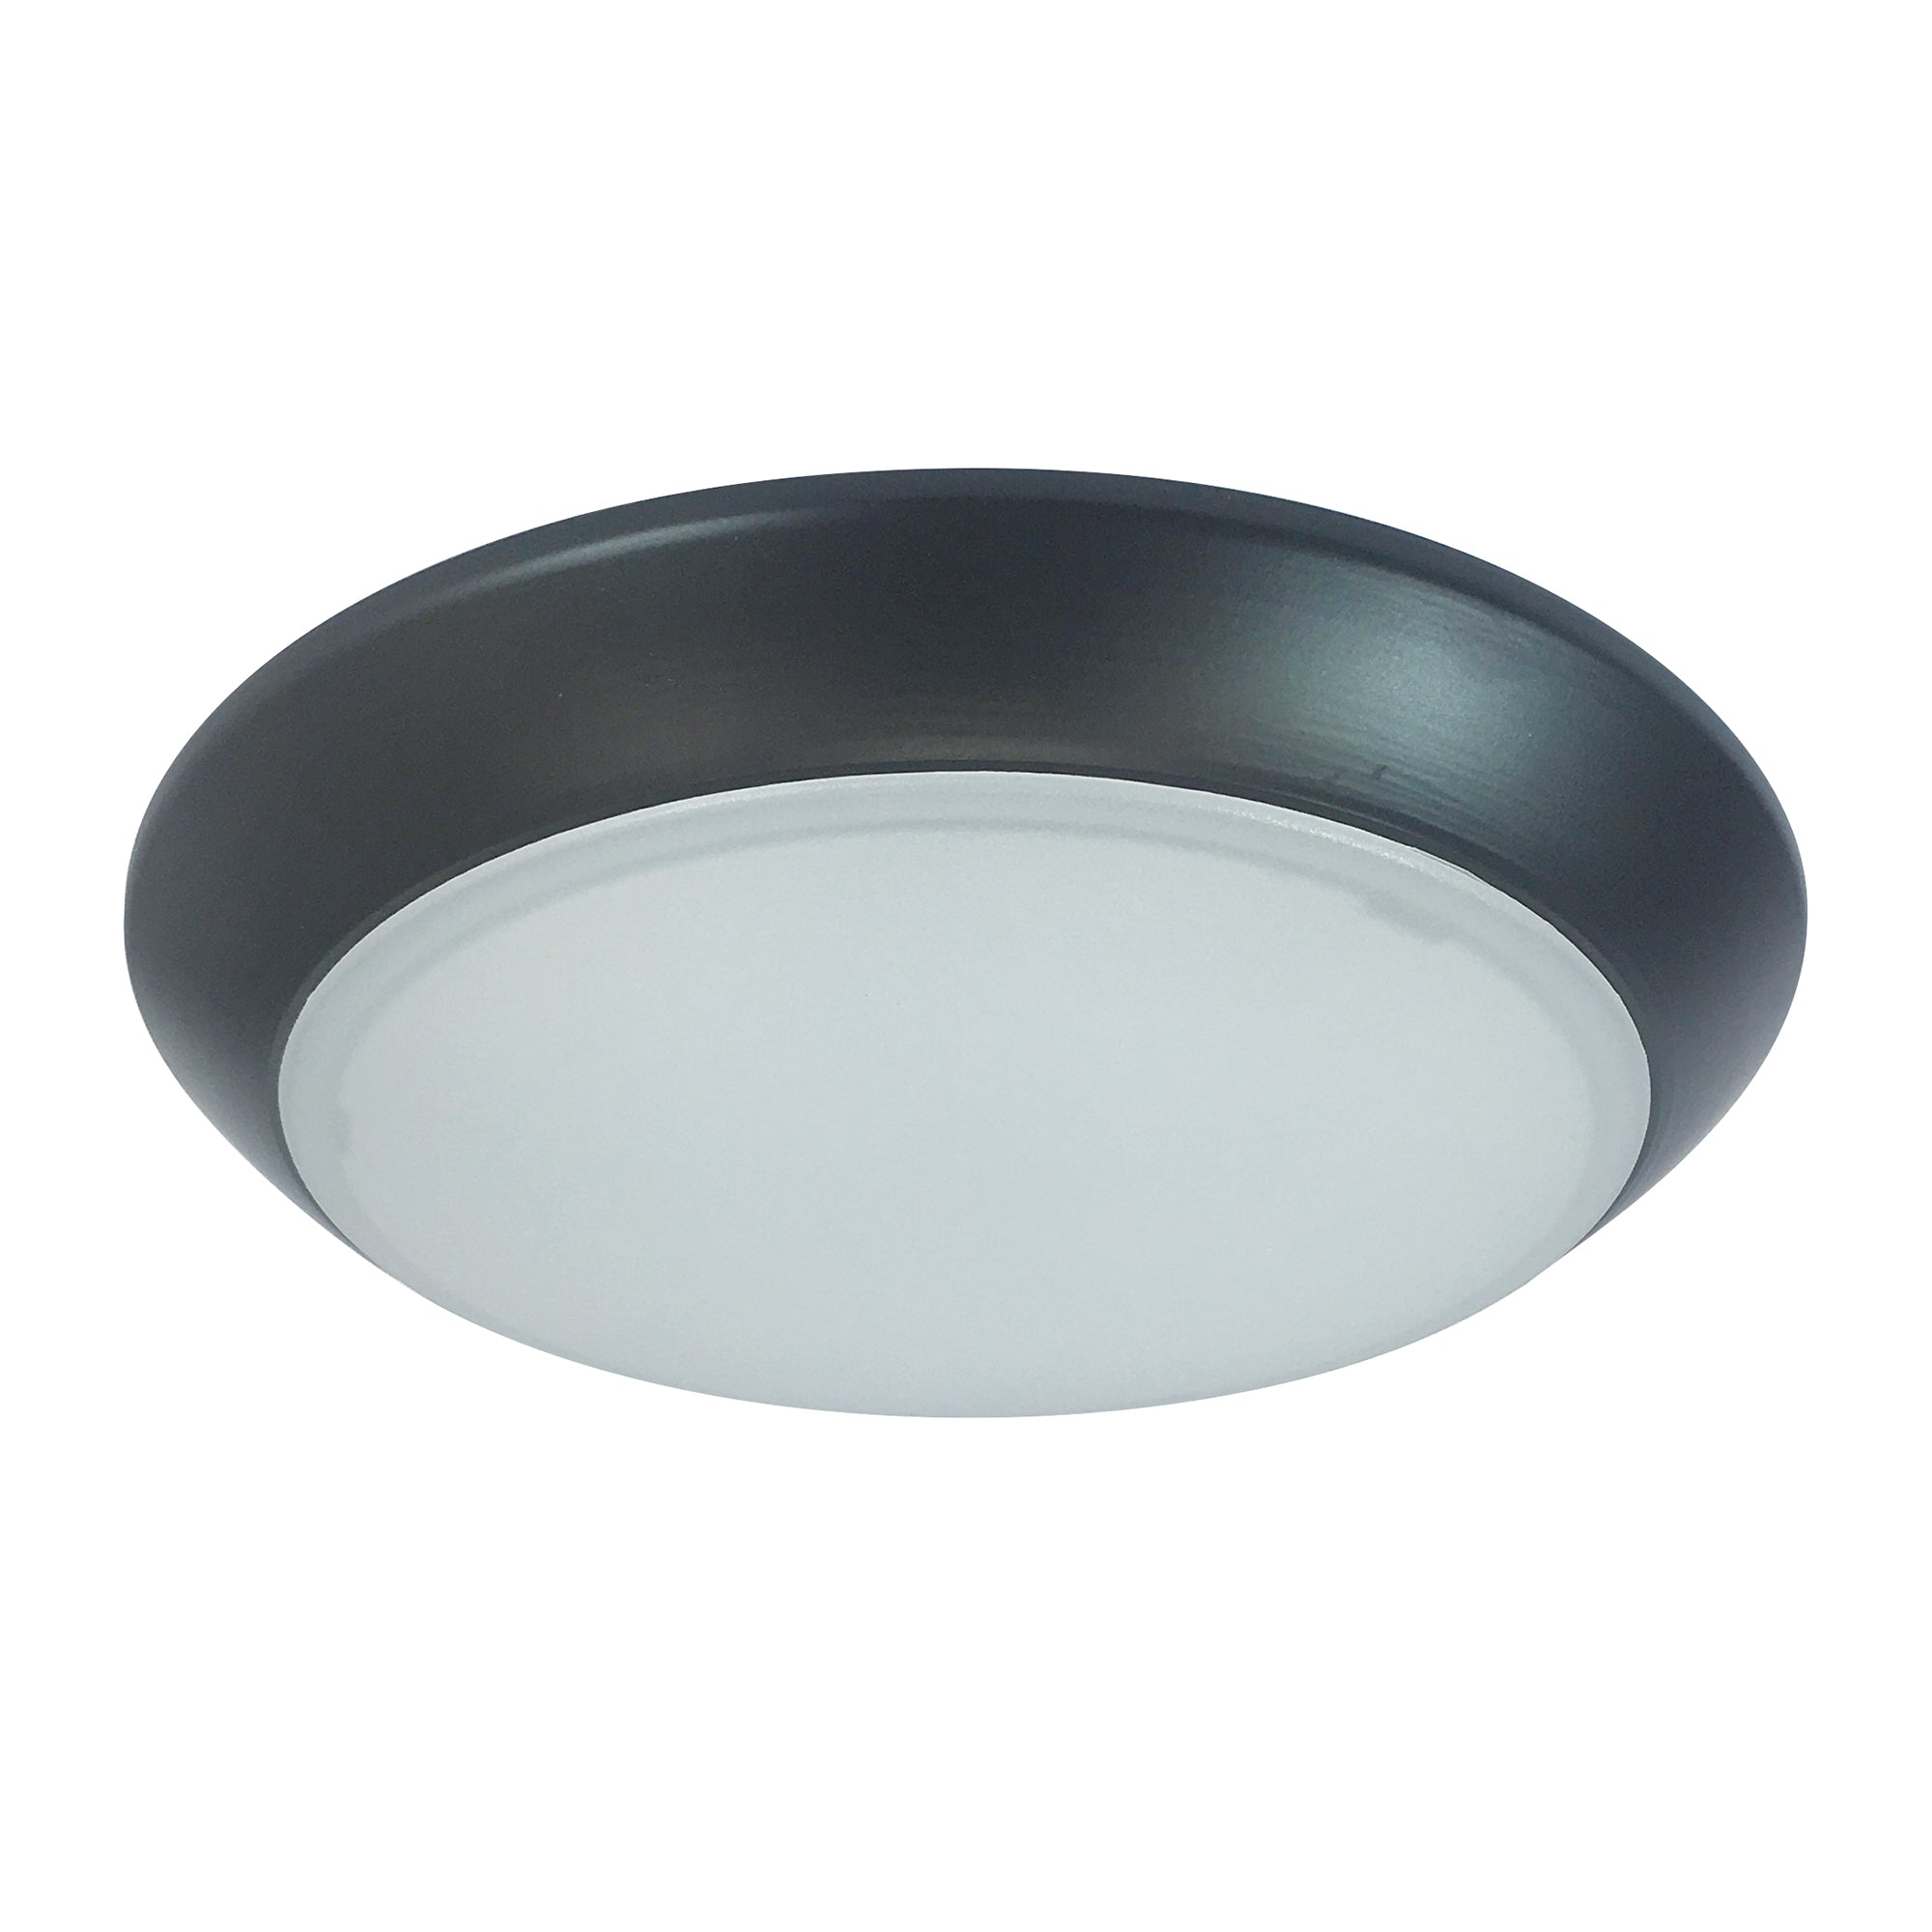 Nora Lighting NLOPAC-R8T2427BZ - Surface - 8 Inch AC Opal LED Surface Mount, 2150lm / 32W, 2700K, Bronze finish